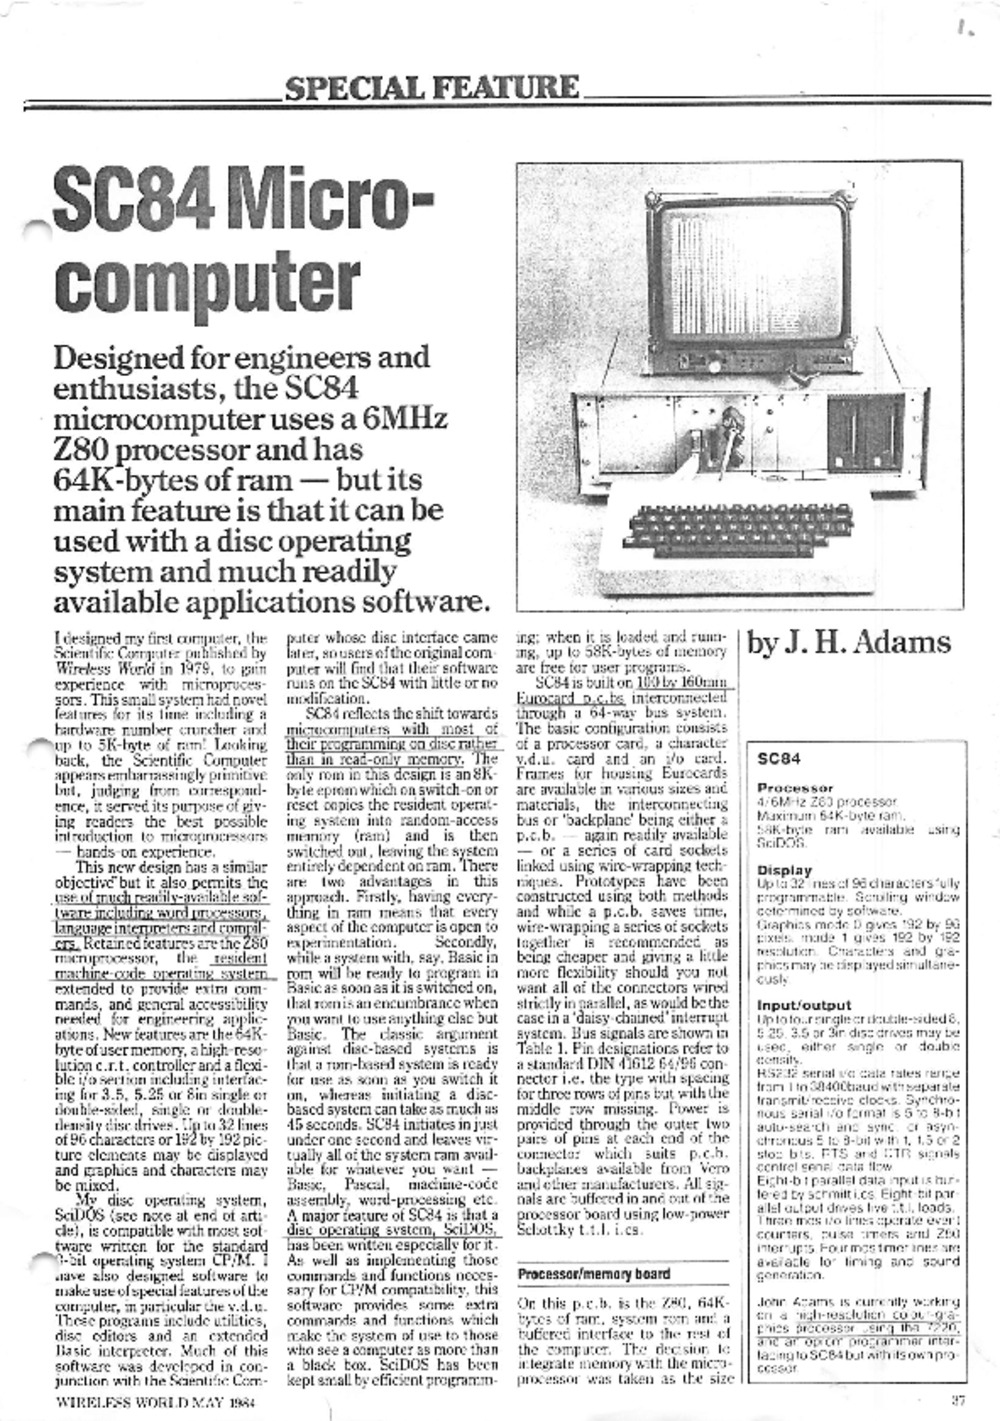 Article: SC84 Microcomputer - Wireless World Special Feature